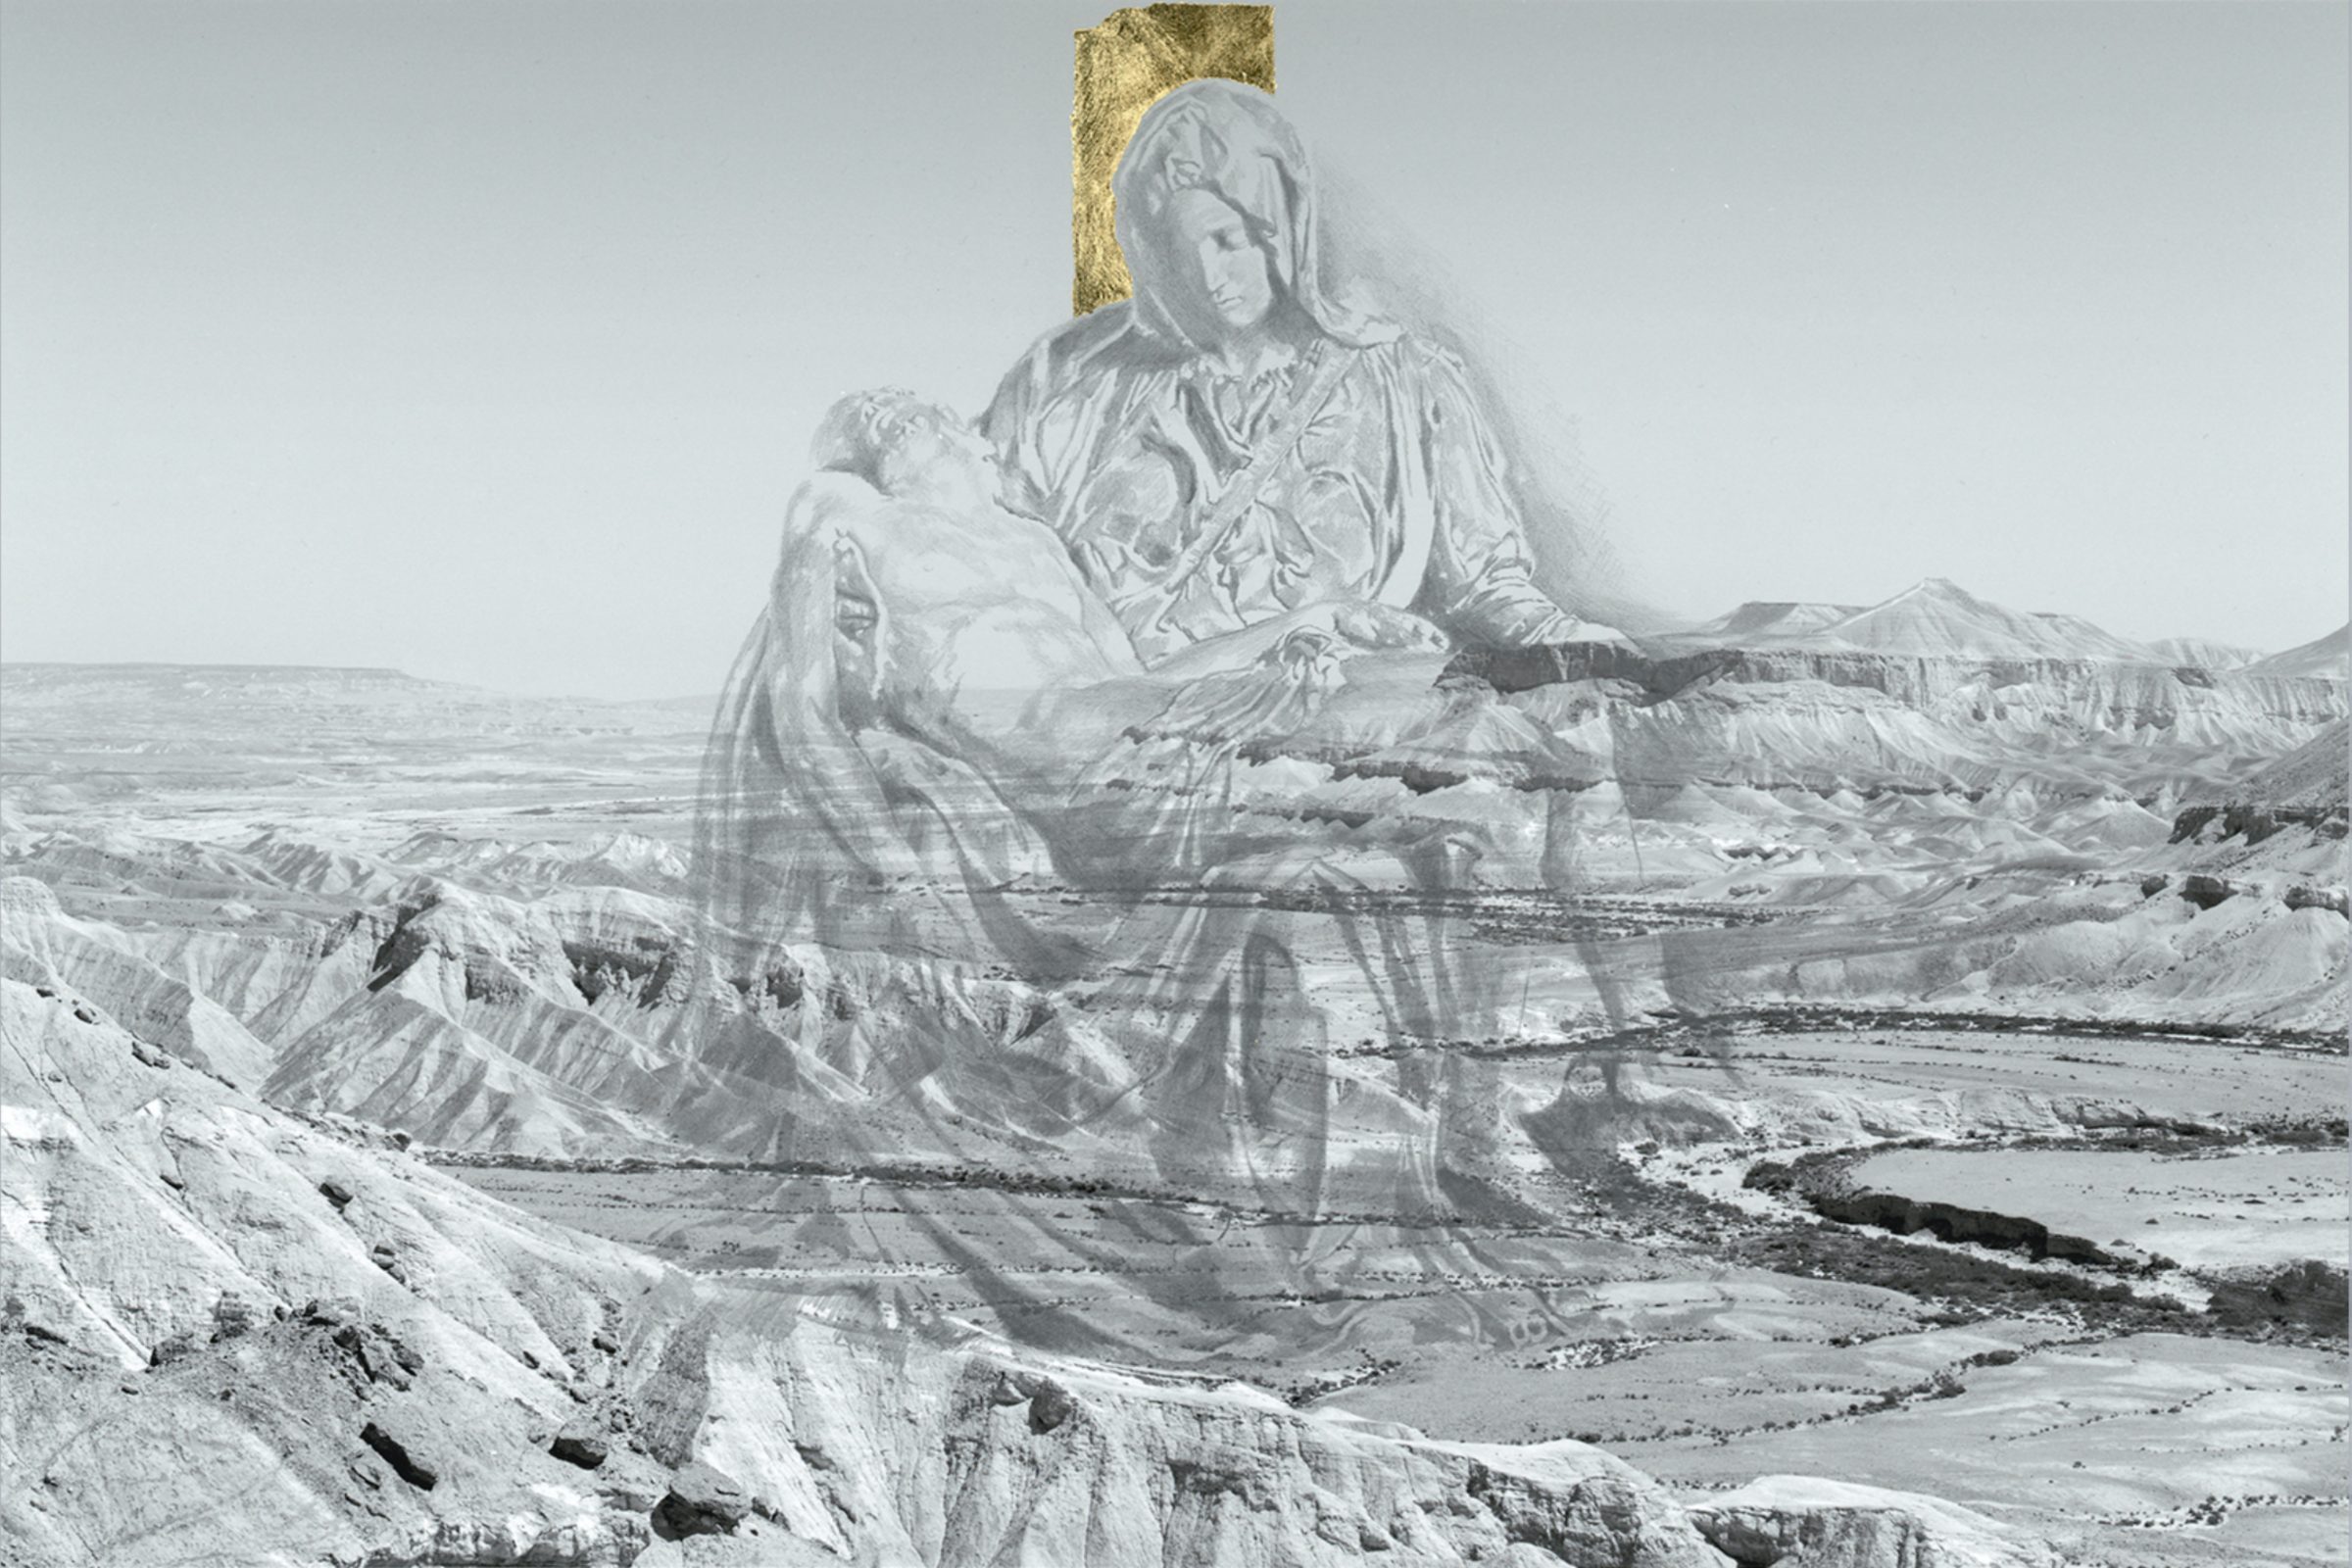 Yifat Bezalel, Pietà 2023. Pencil and gold leaves on archival print paper, 160 x 227 cm. Courtesy of MK Projects.